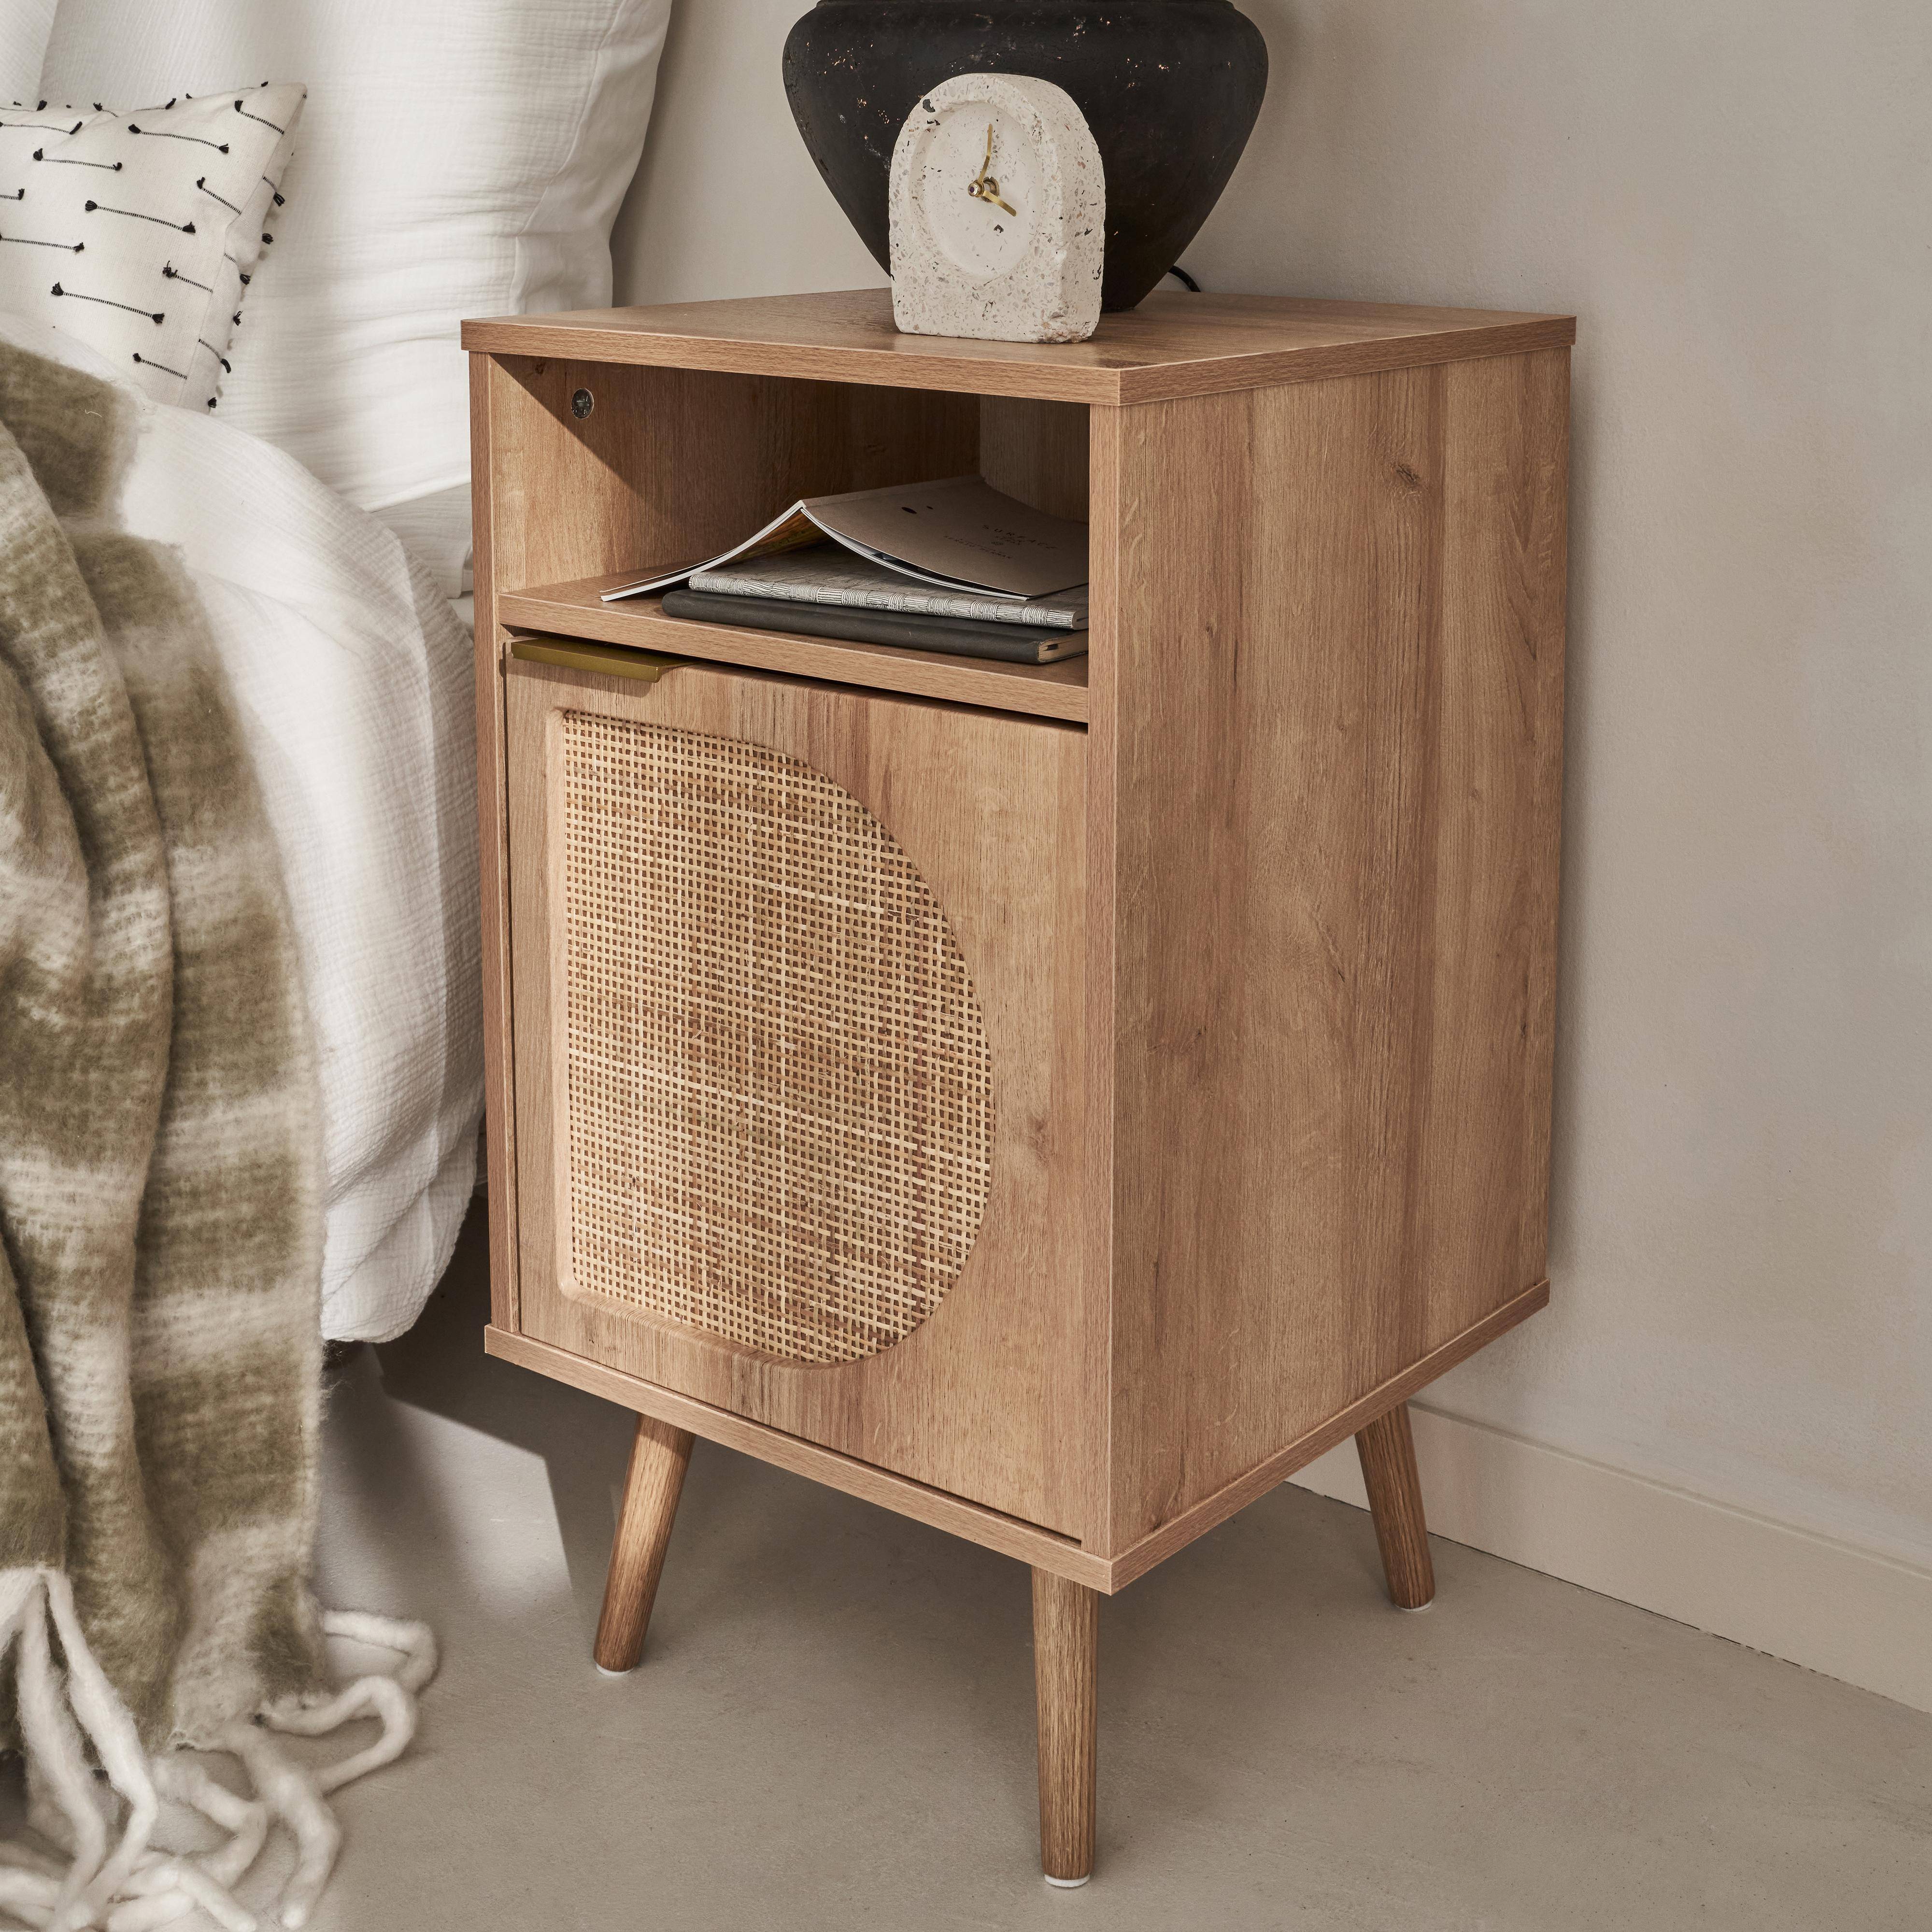 Wood and rounded cane rattan bedside table, 40x39x65.8cm, Eva, 1 cupboard, 1 storage space Photo2